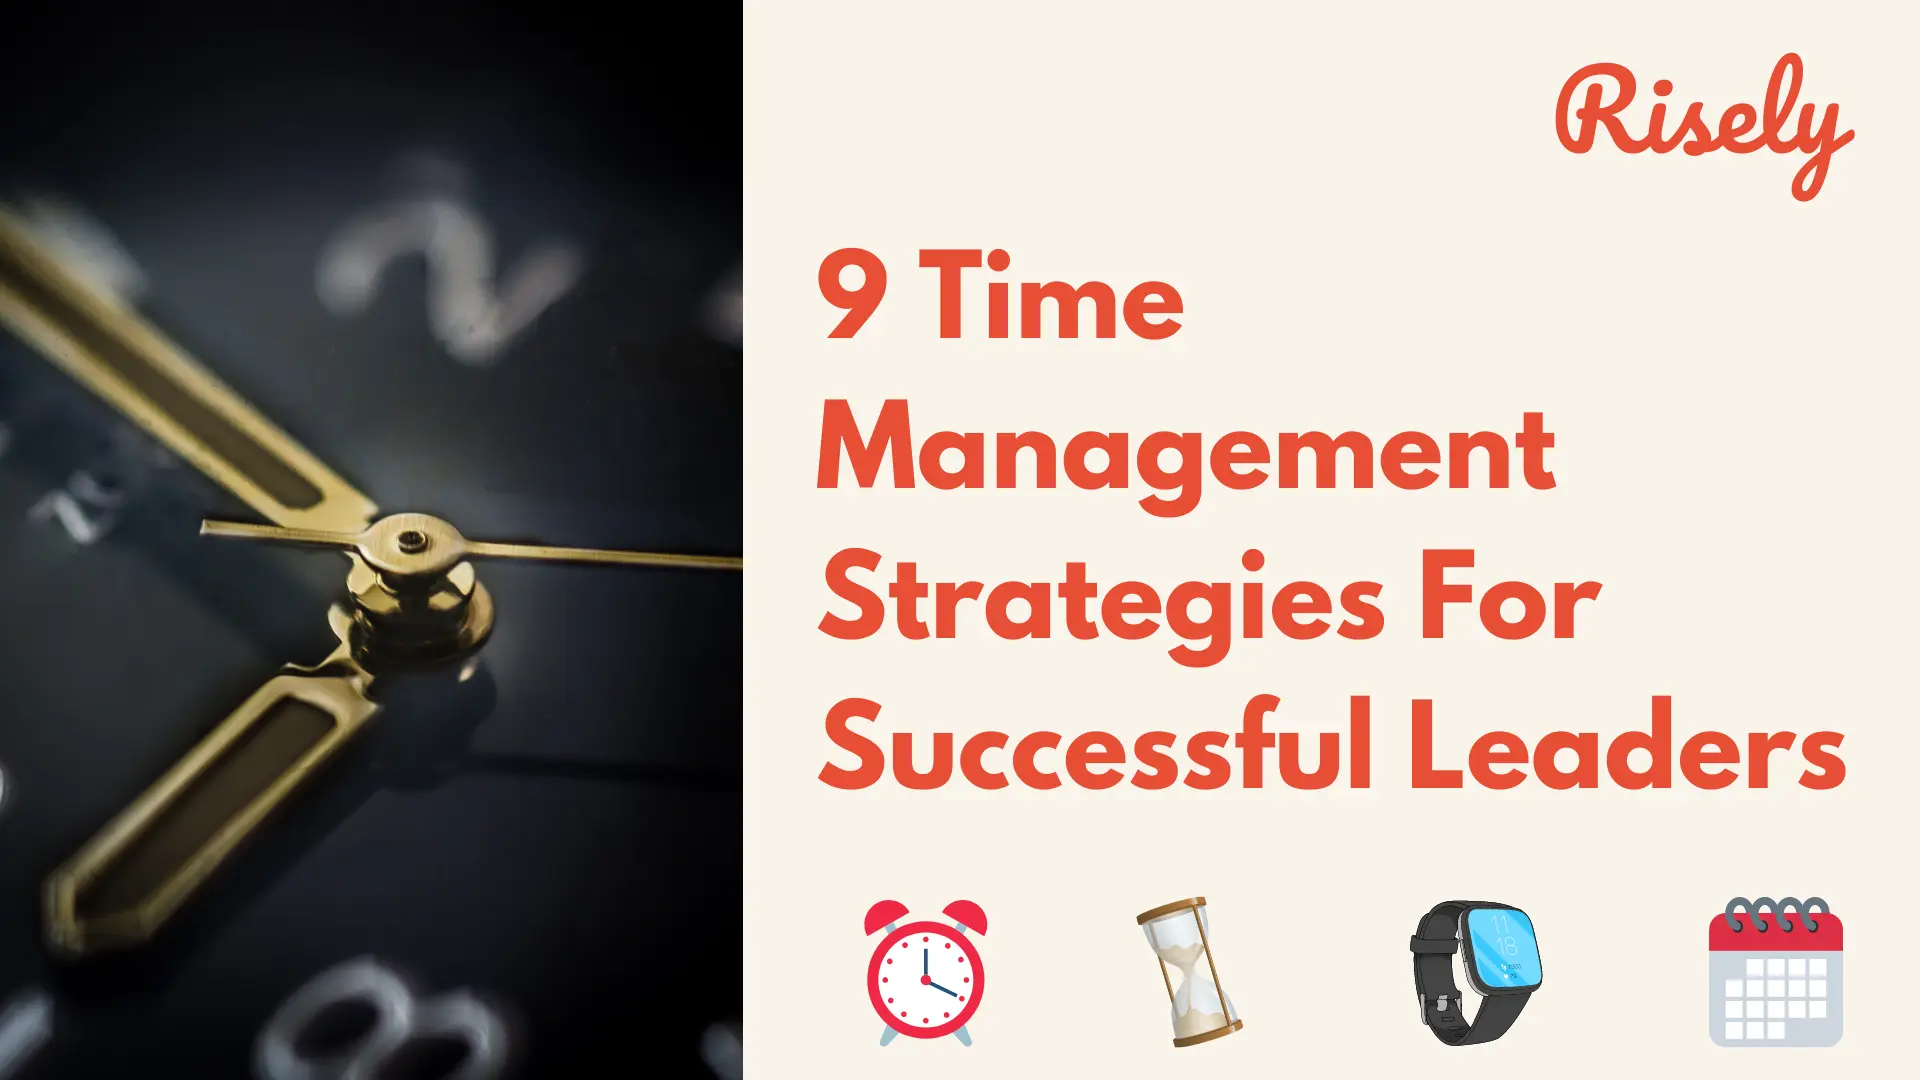 9 Time Management Strategies For Successful Leaders